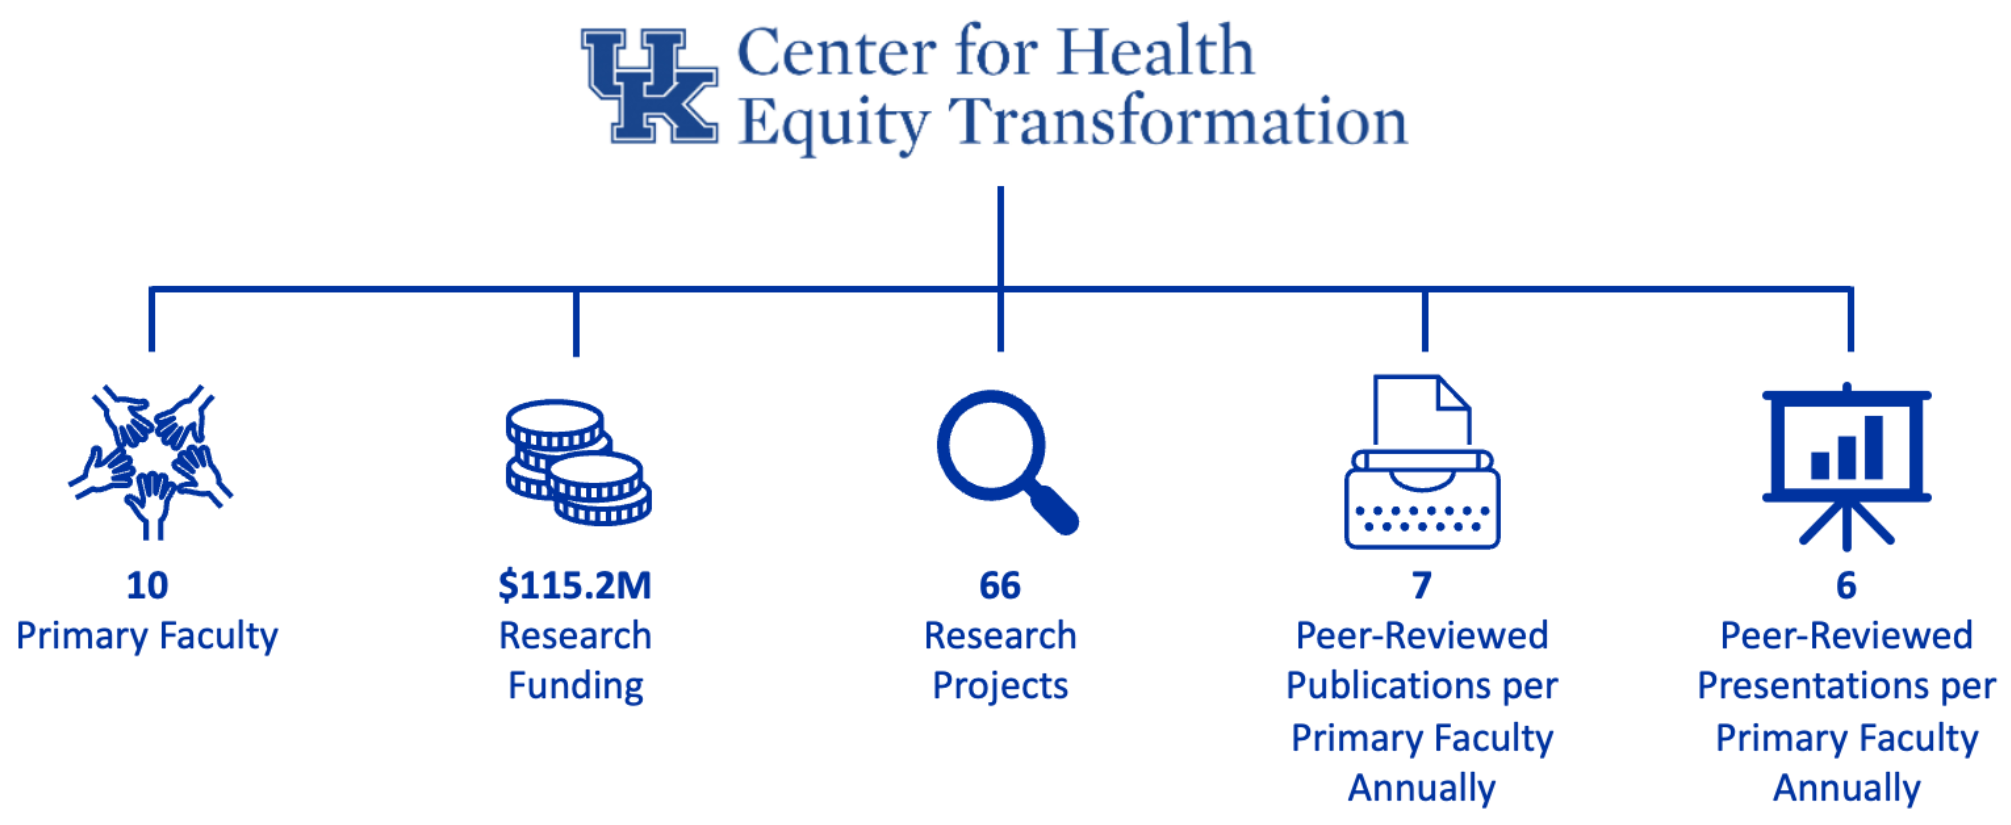 CHET graphic showing that CHET has 10 primary faculty, $115.2M in research funding, 66 research projects, 7 peer-reviewed publications and 6 peer-reviewed presentations per primary faculty annually